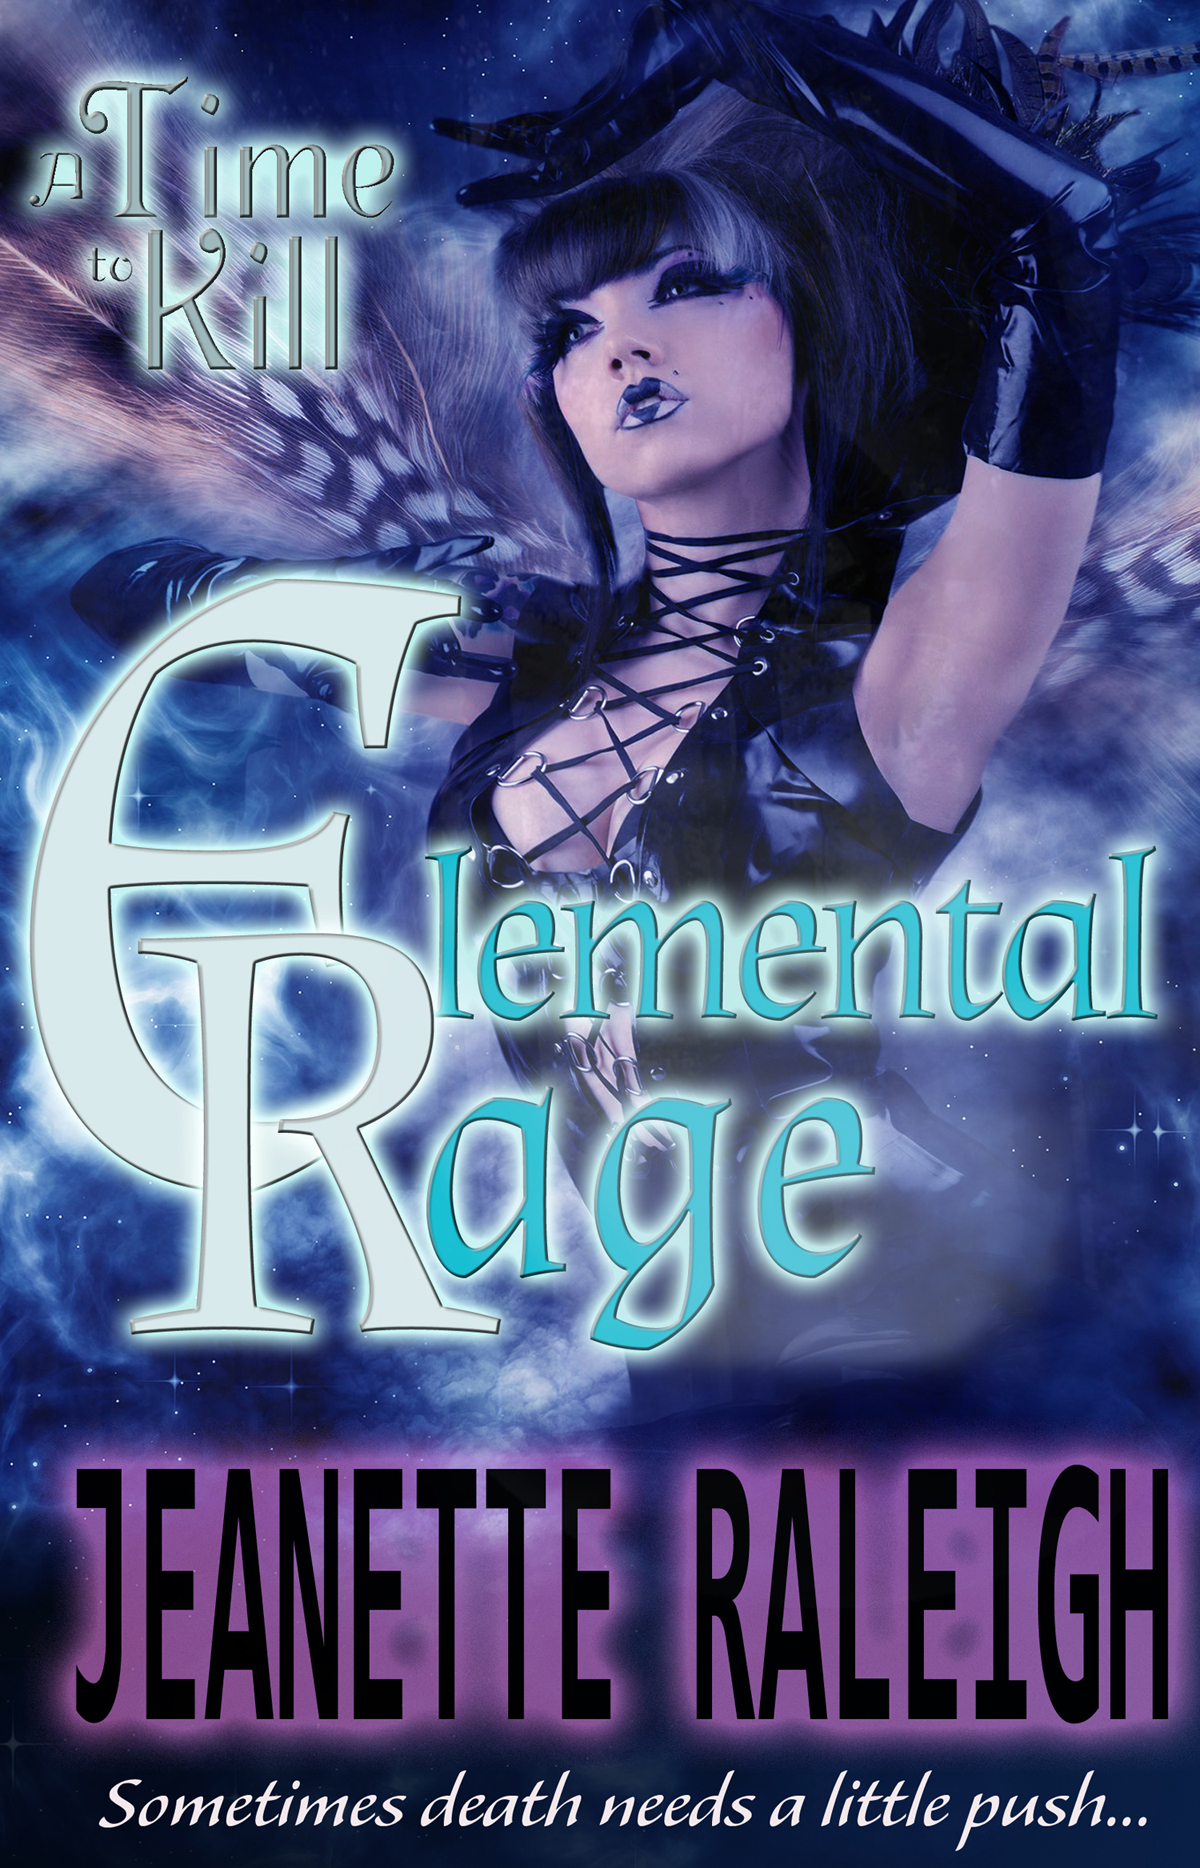 FREE: Elemental Rage: A Time to Kill by Jeanette Raleigh